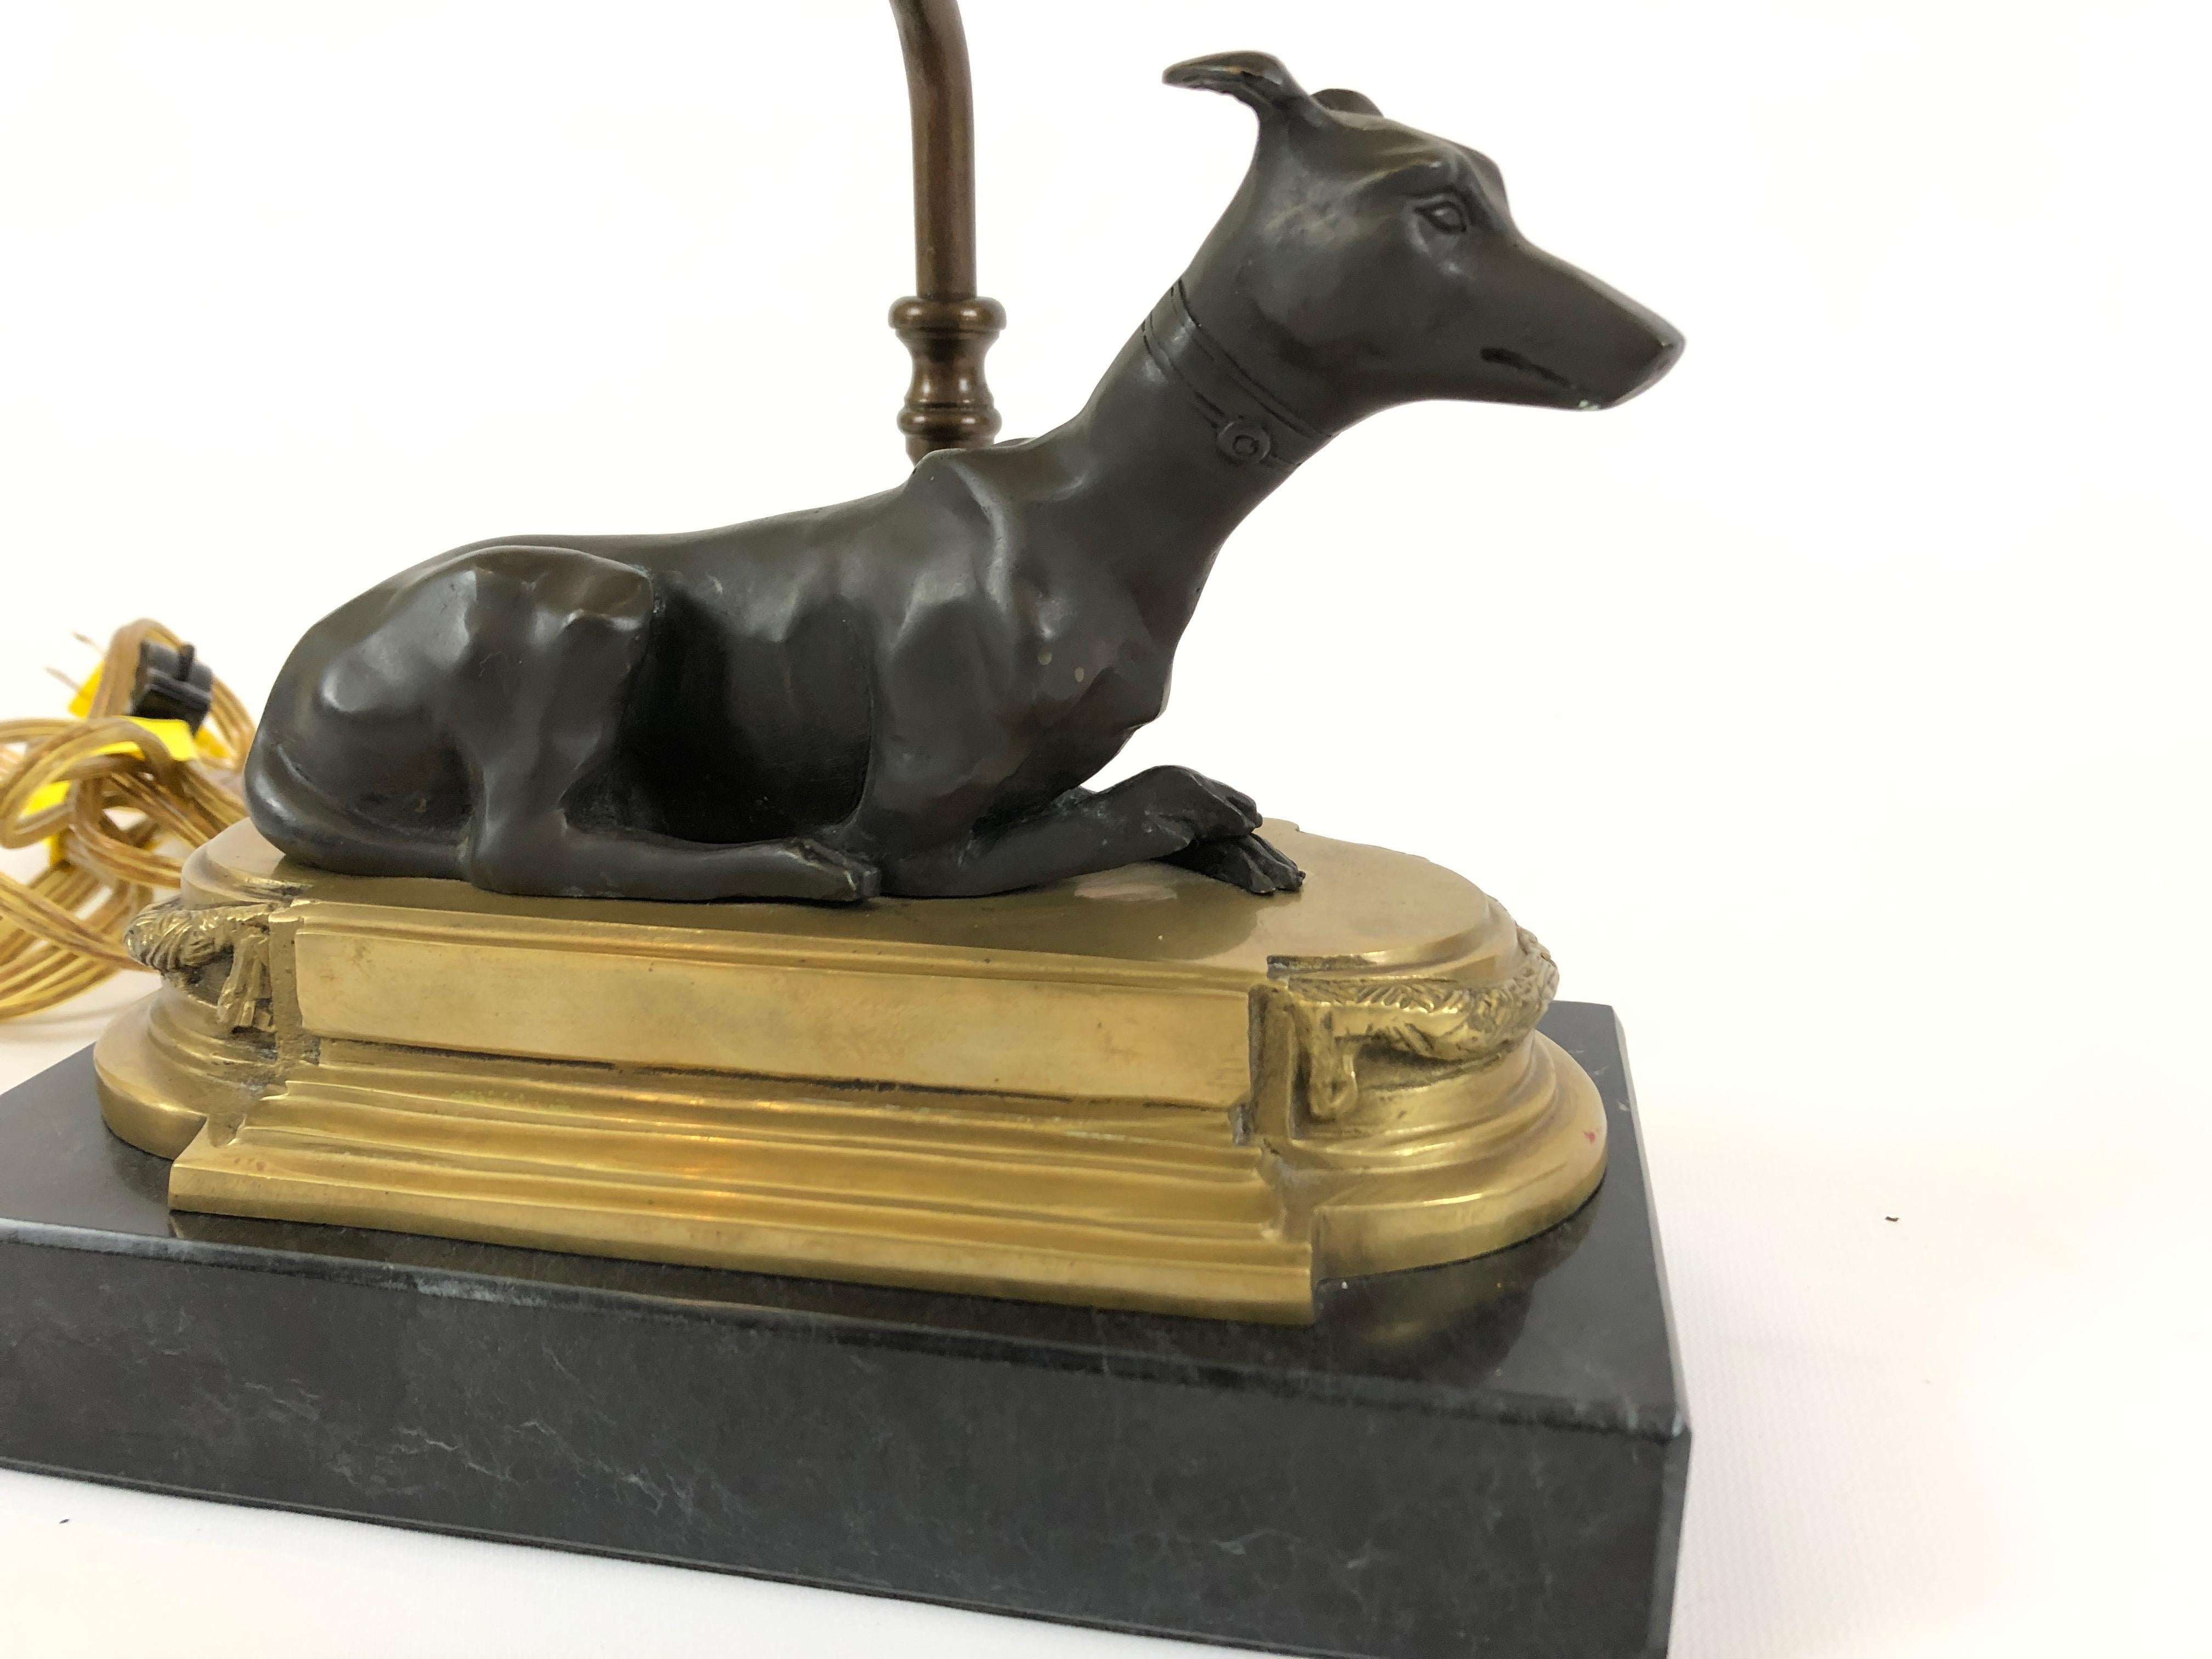 A wonderfully sculptural table or desk lamp having a bronze greyhound dog resting on chunky brass and wood base, stylishly designed custom shade and neoclassical brass finial to top it off.